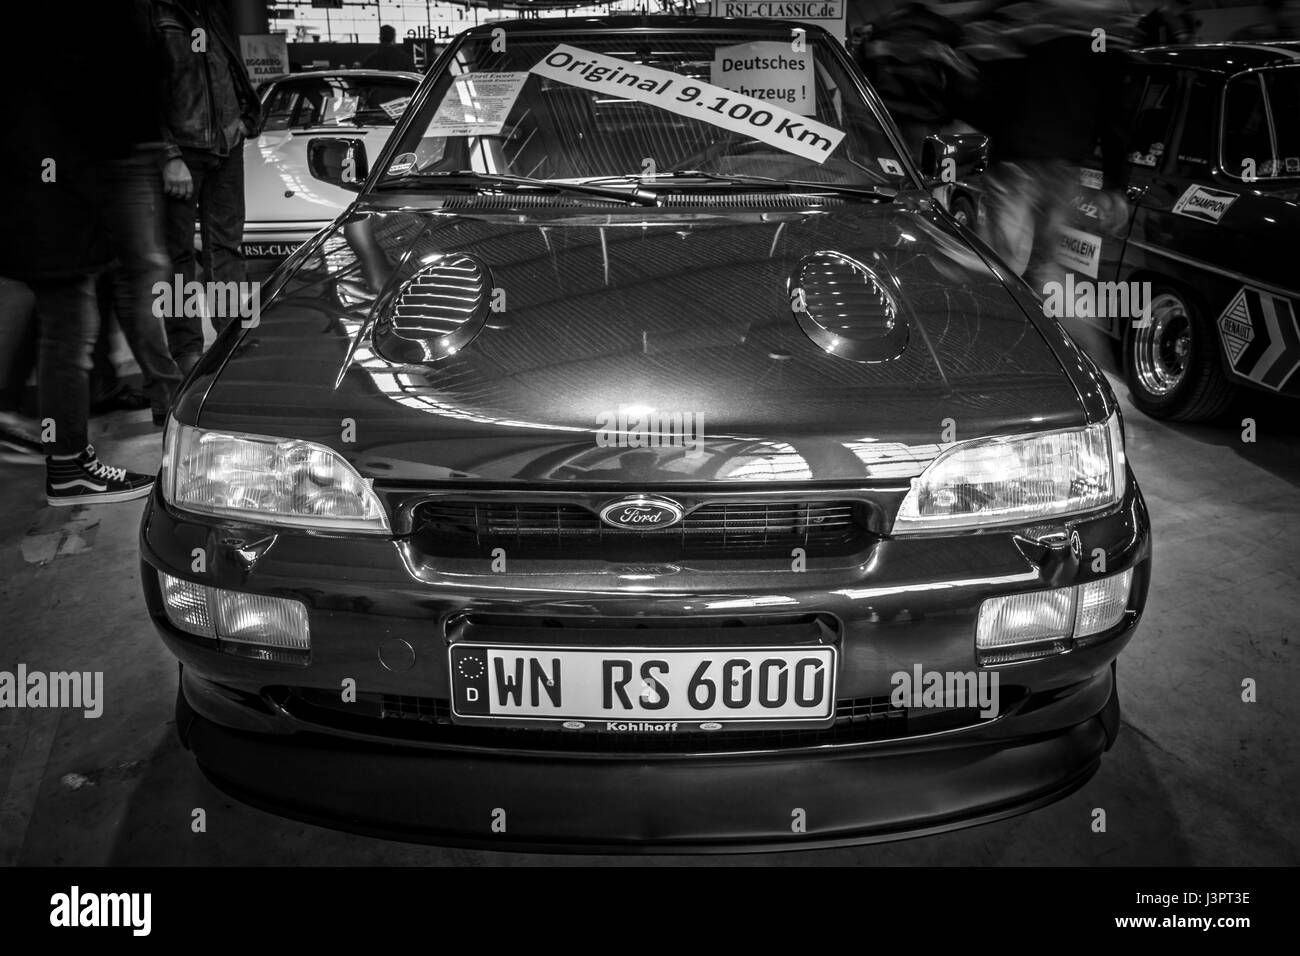 STUTTGART, GERMANY - MARCH 03, 2017: Rally special car Ford Escort RS Cosworth, 1993. Black and white. Europe's greatest classic car exhibition 'RETRO CLASSICS' Stock Photo